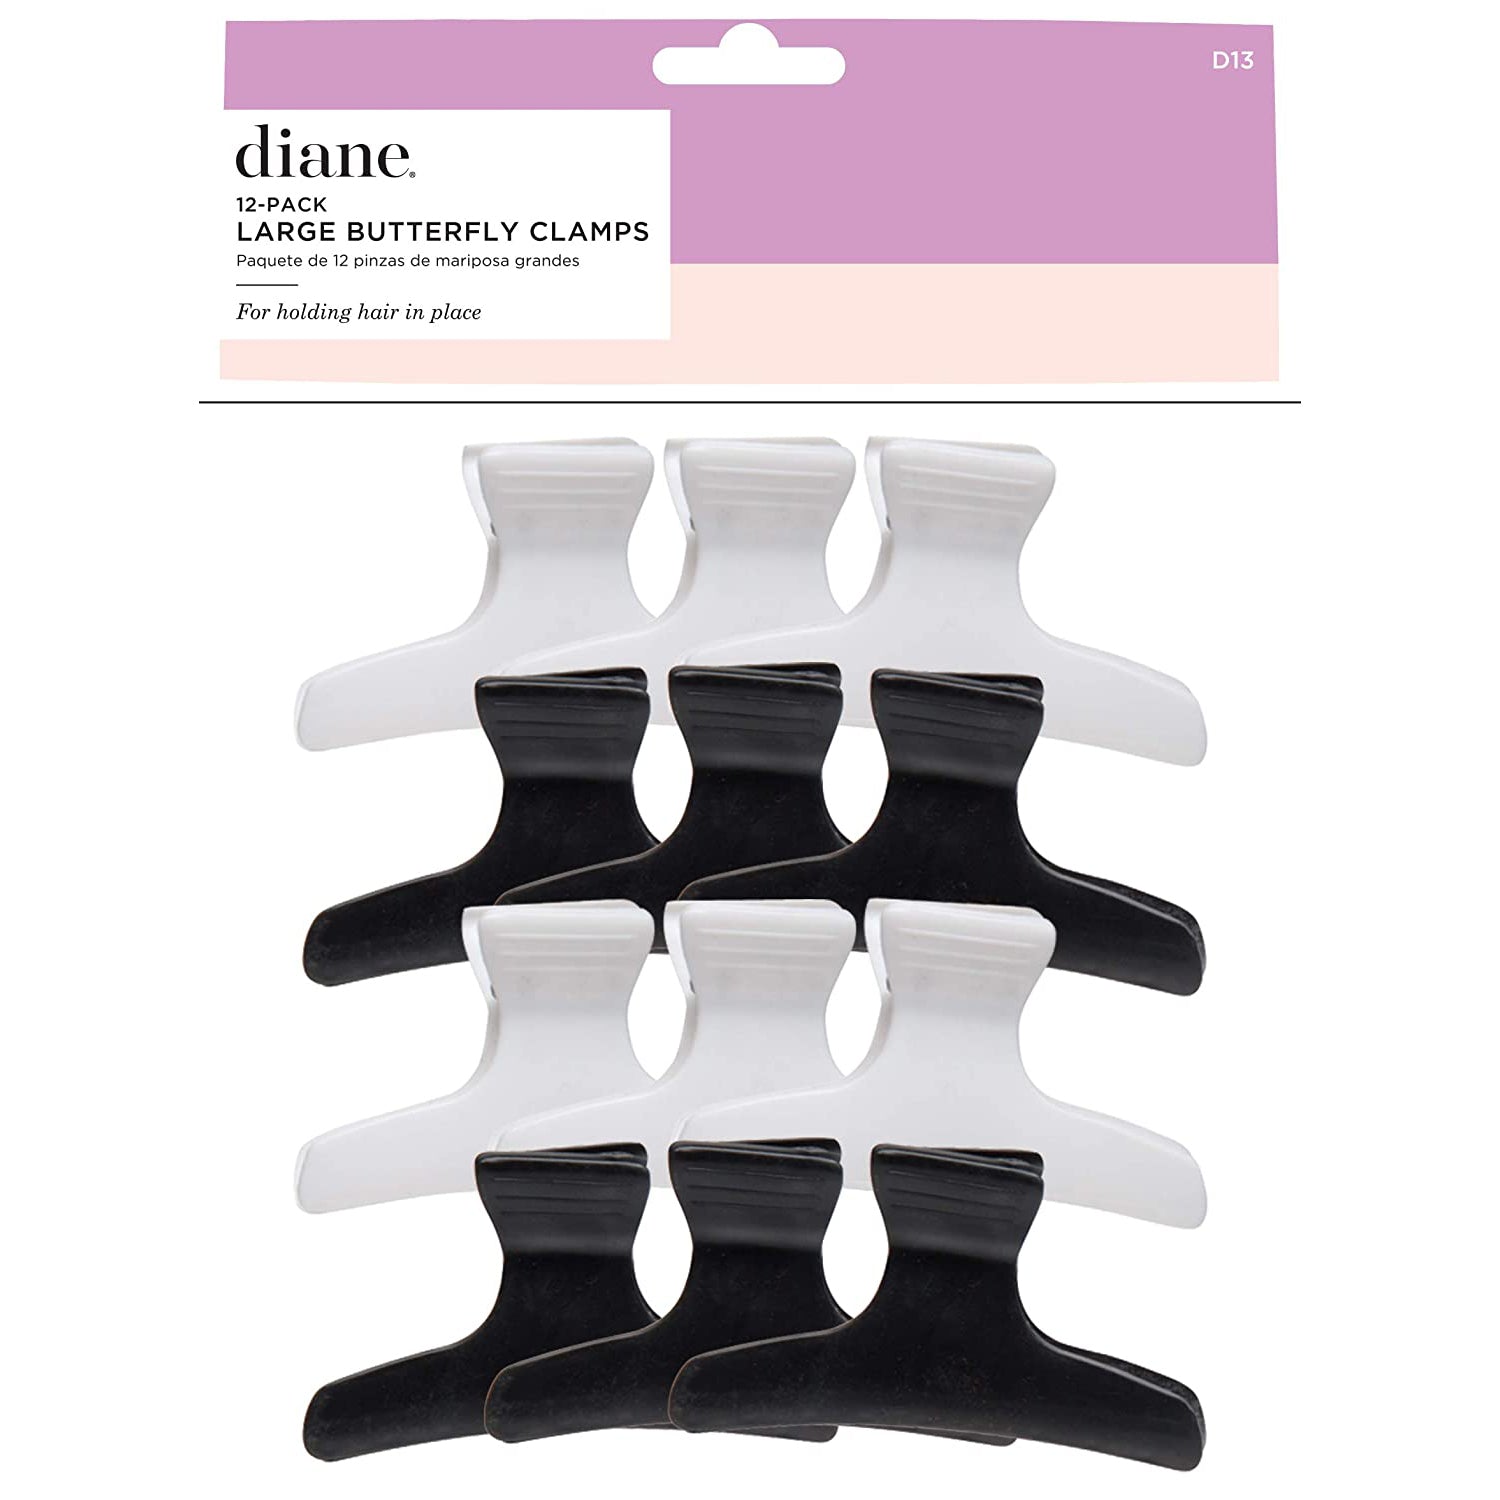 Large Butterfly Clamps | 12 Pack | D13 | DIANE - SH Salons